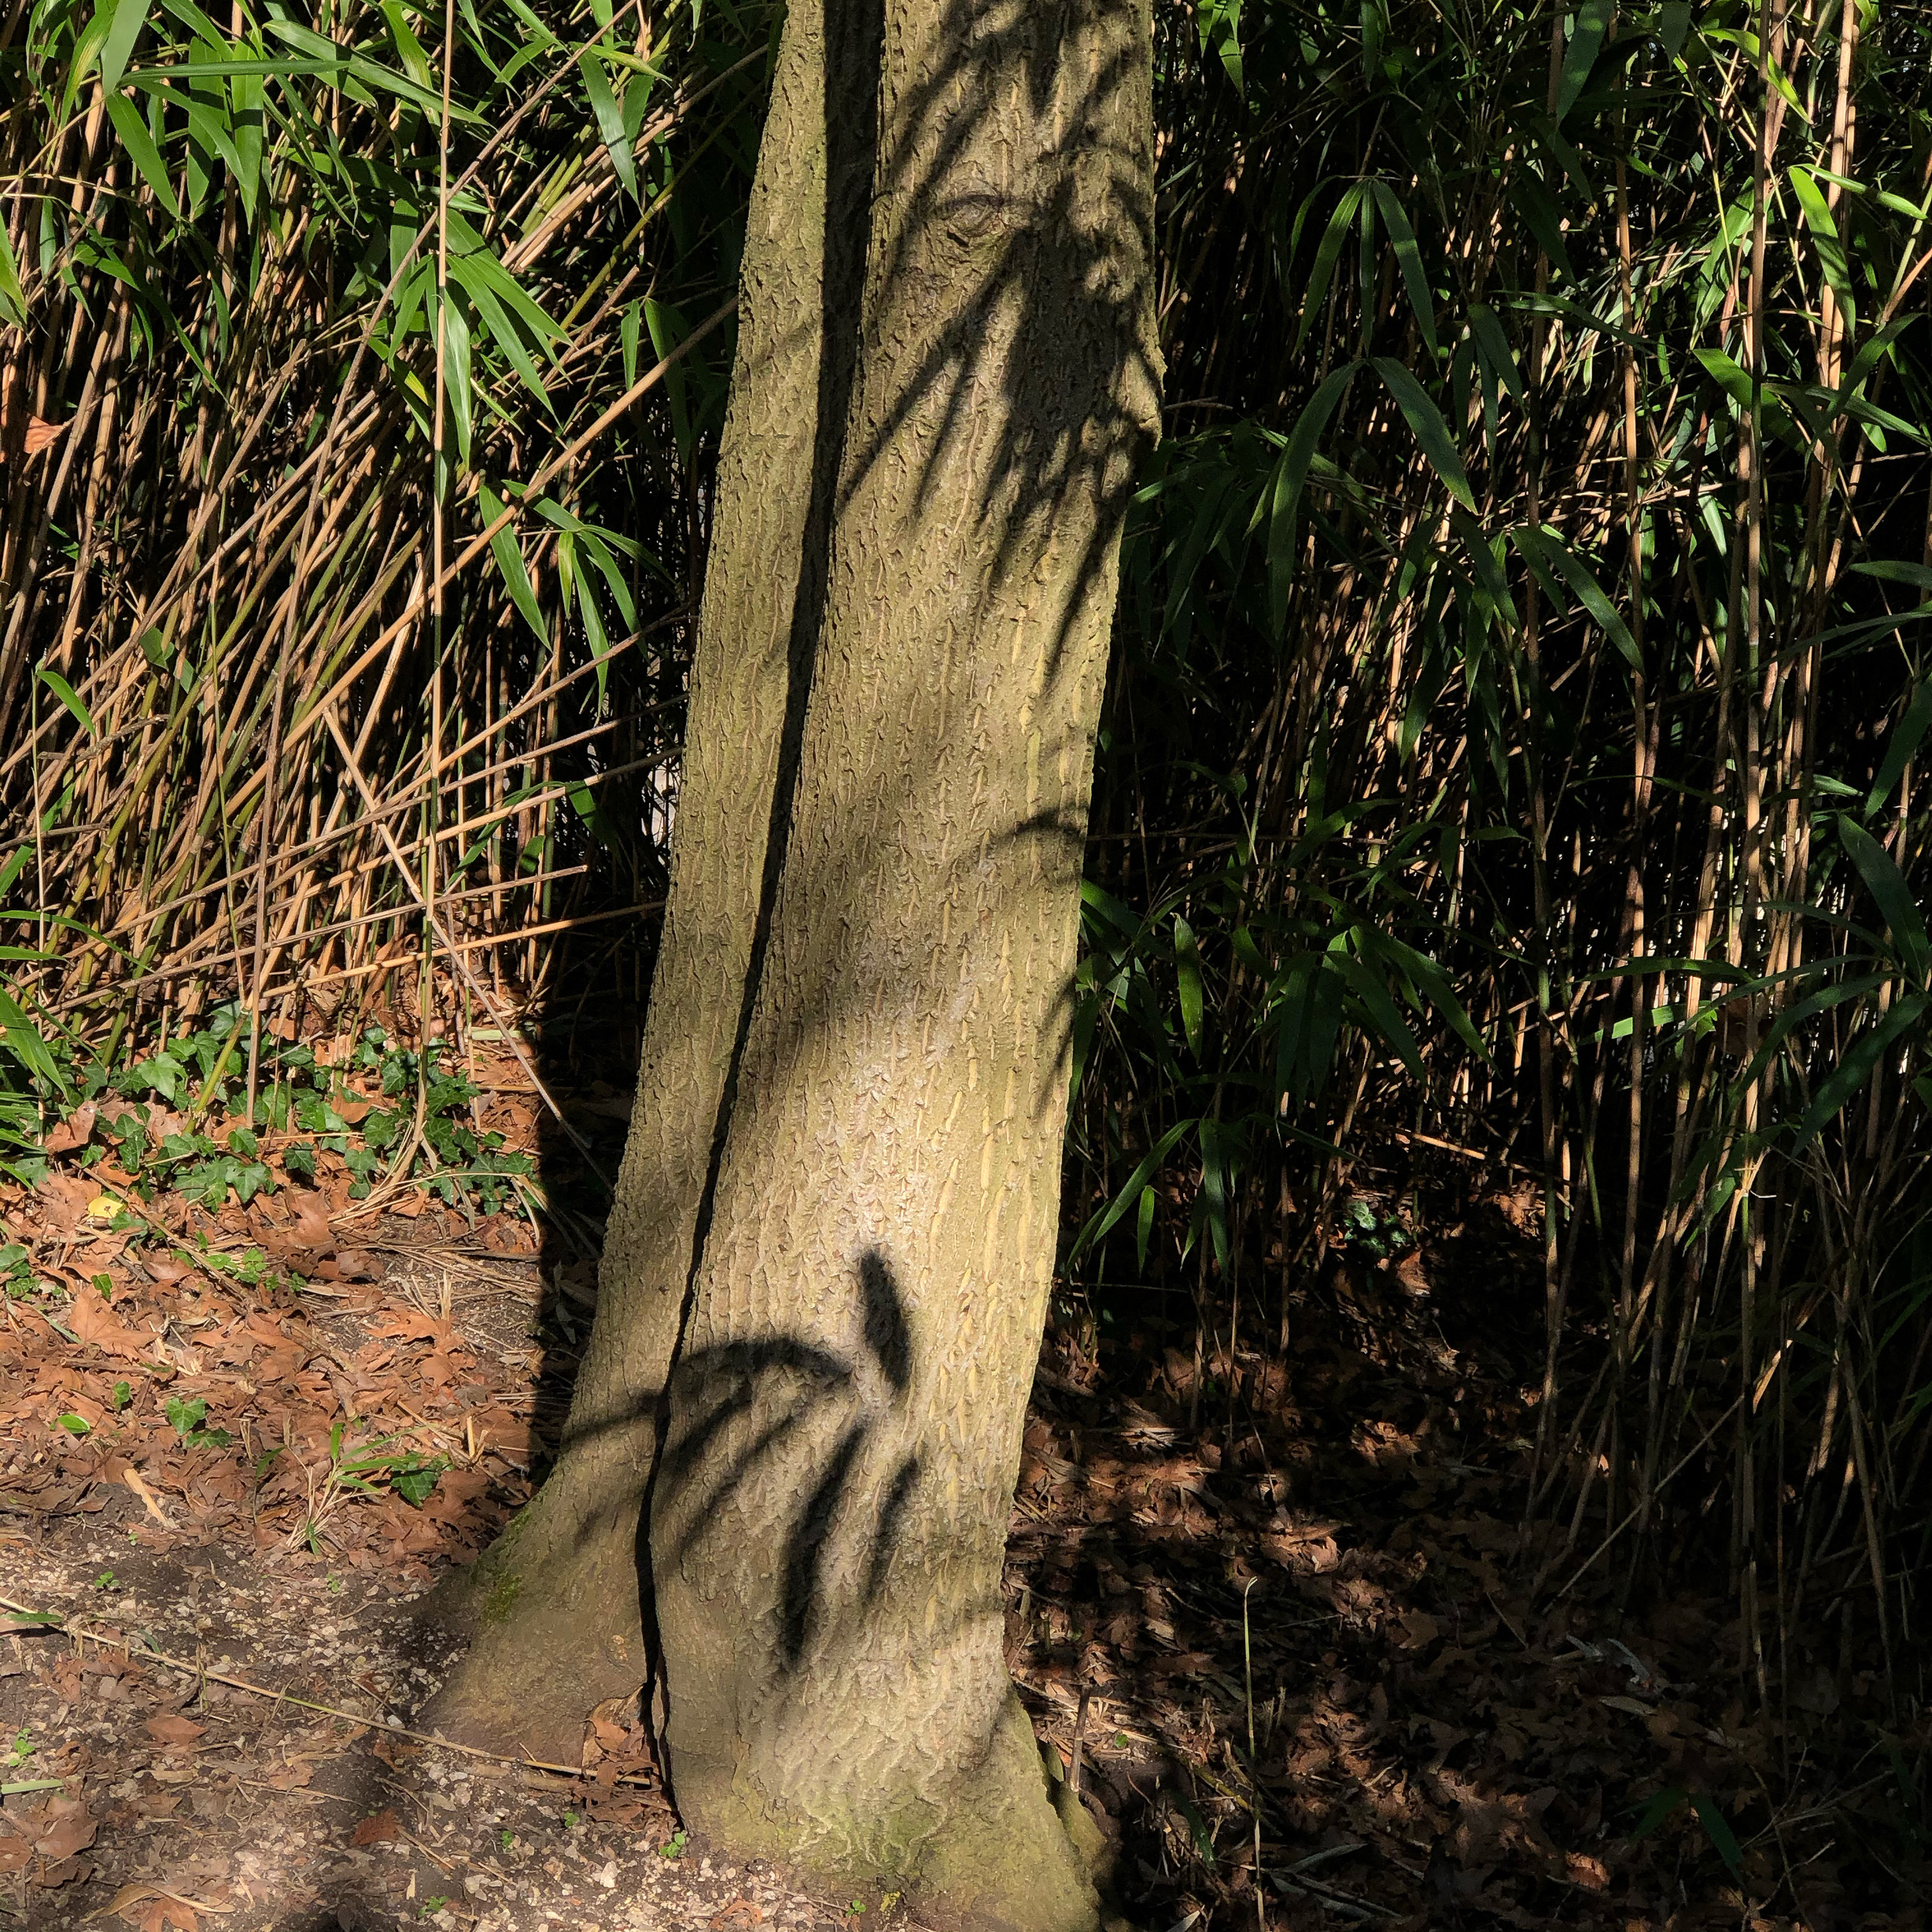 The Bamboo Shadow